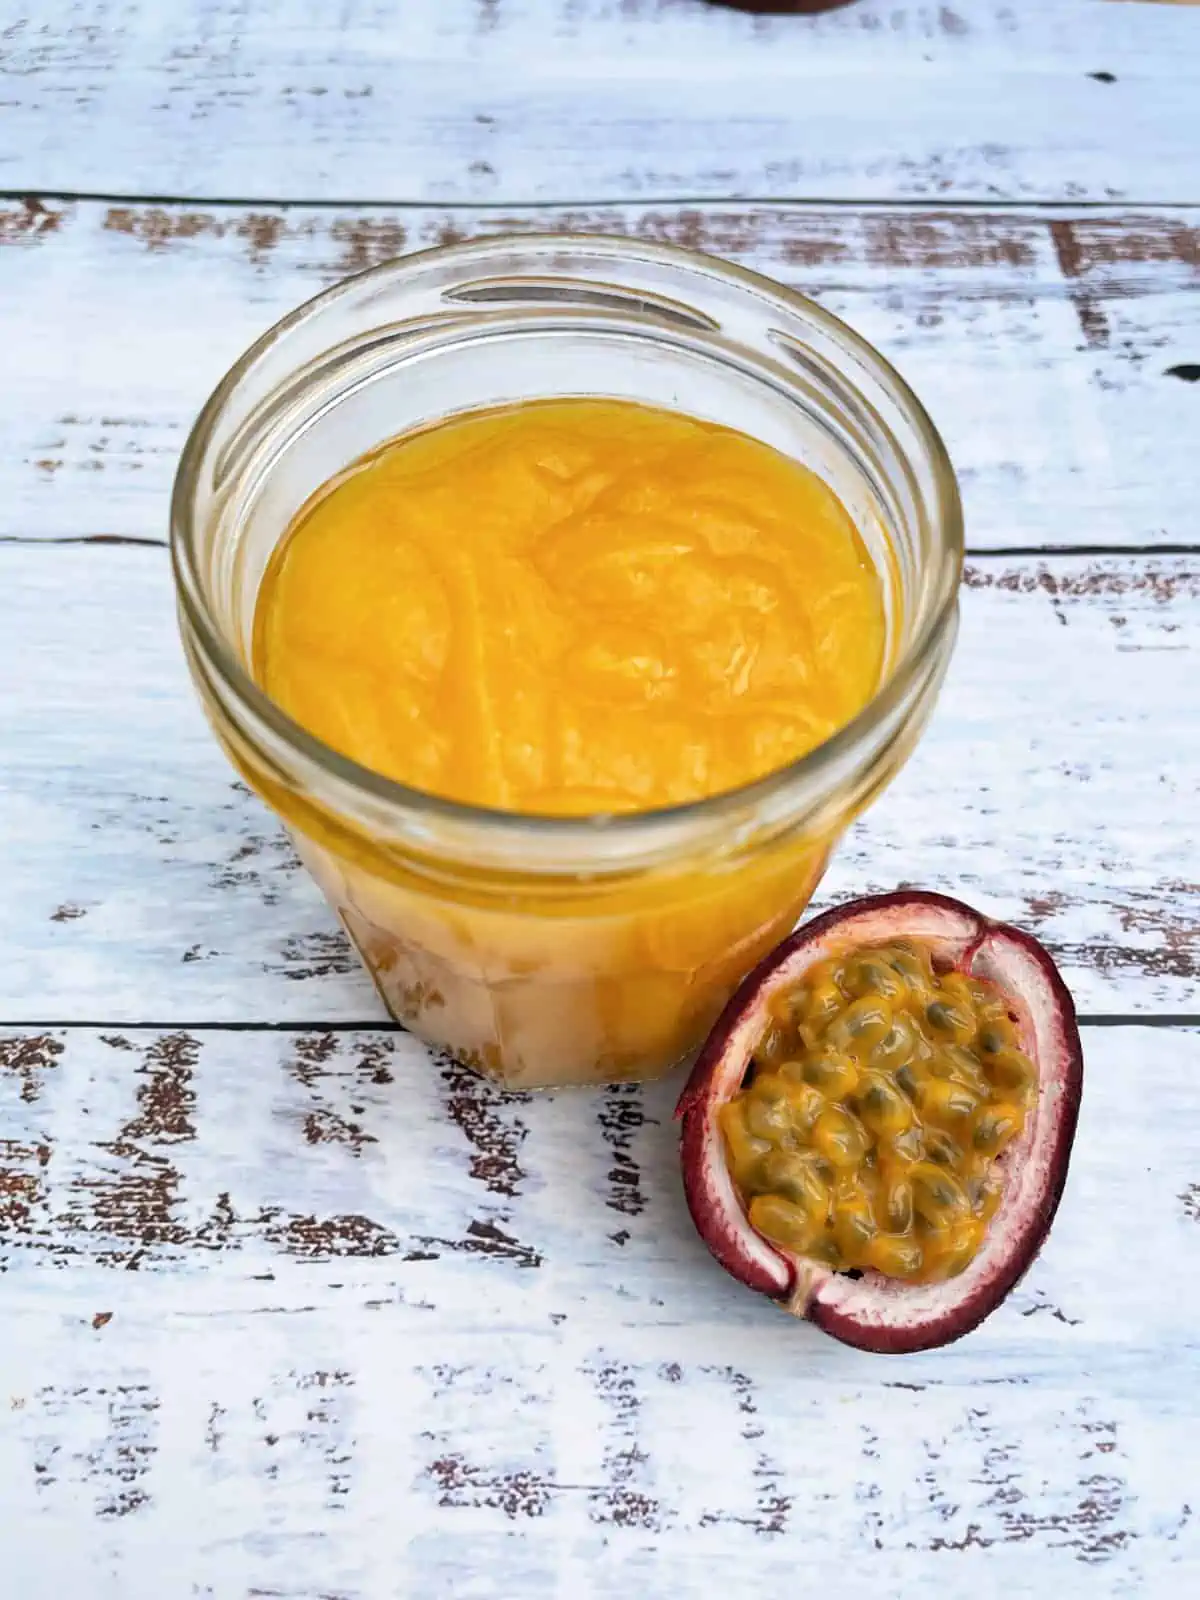 Jar of passionfruit curd with half a passionfruit on the side.